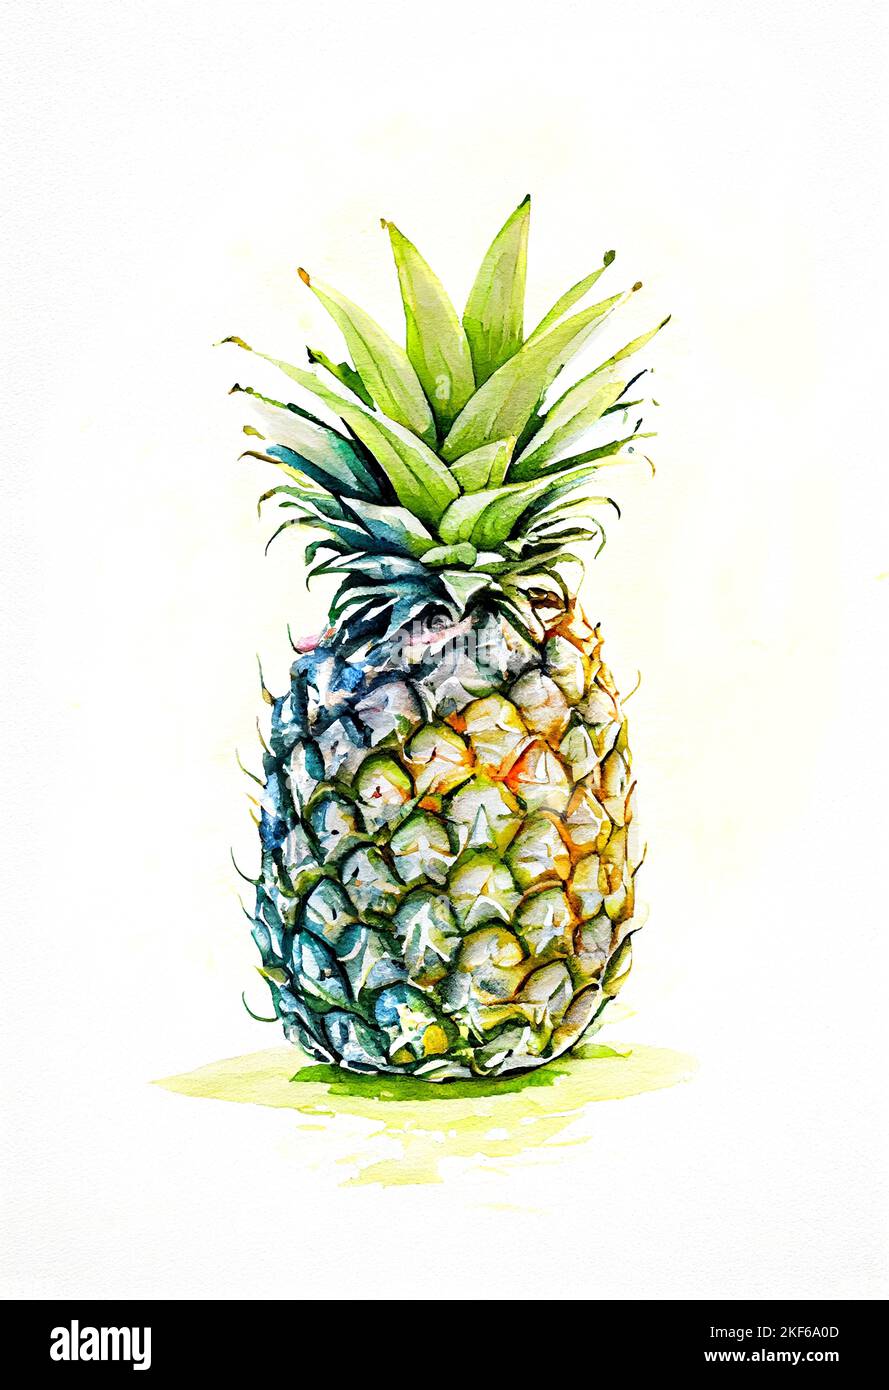 Illustration of Pineapple in Watercolor Painting Style for wedding stationary, greetings, wallpapers, fashion, background. Stock Photo